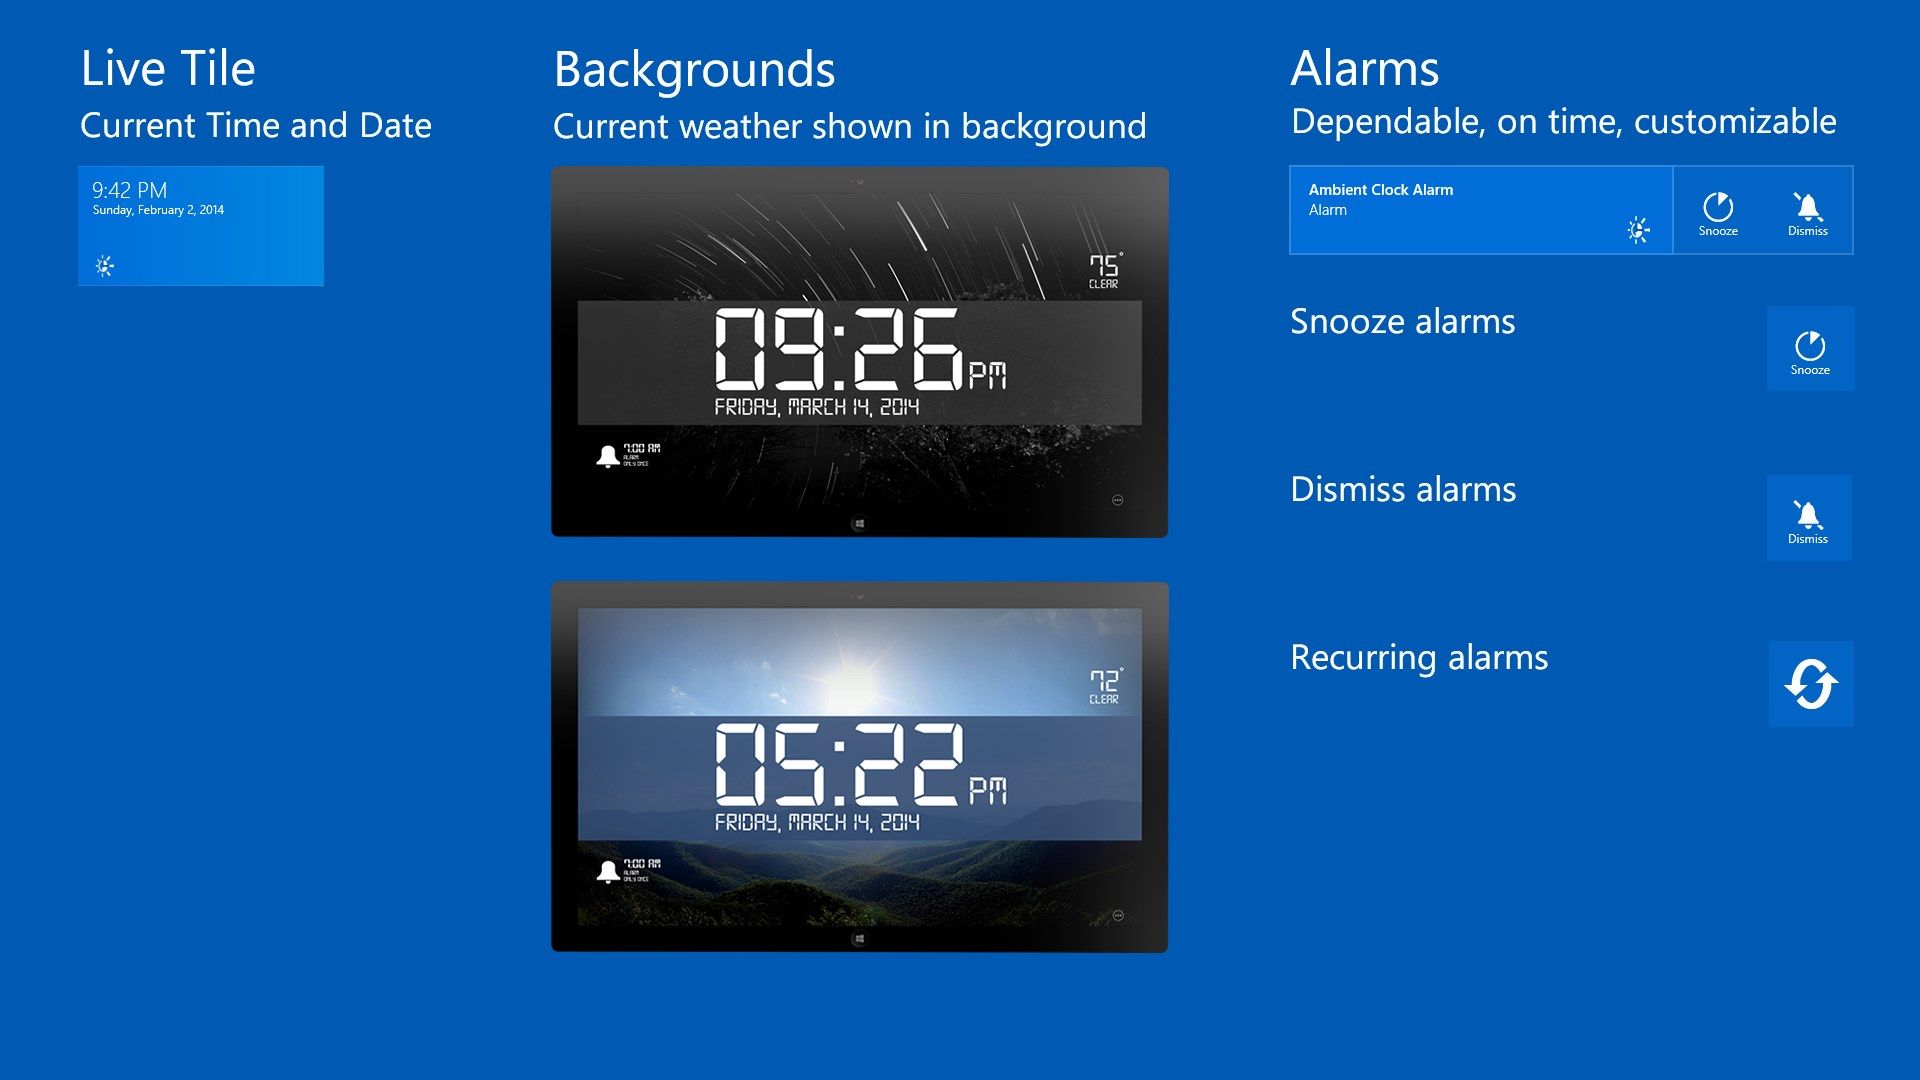 Live Tile, Backgrounds, Alarms